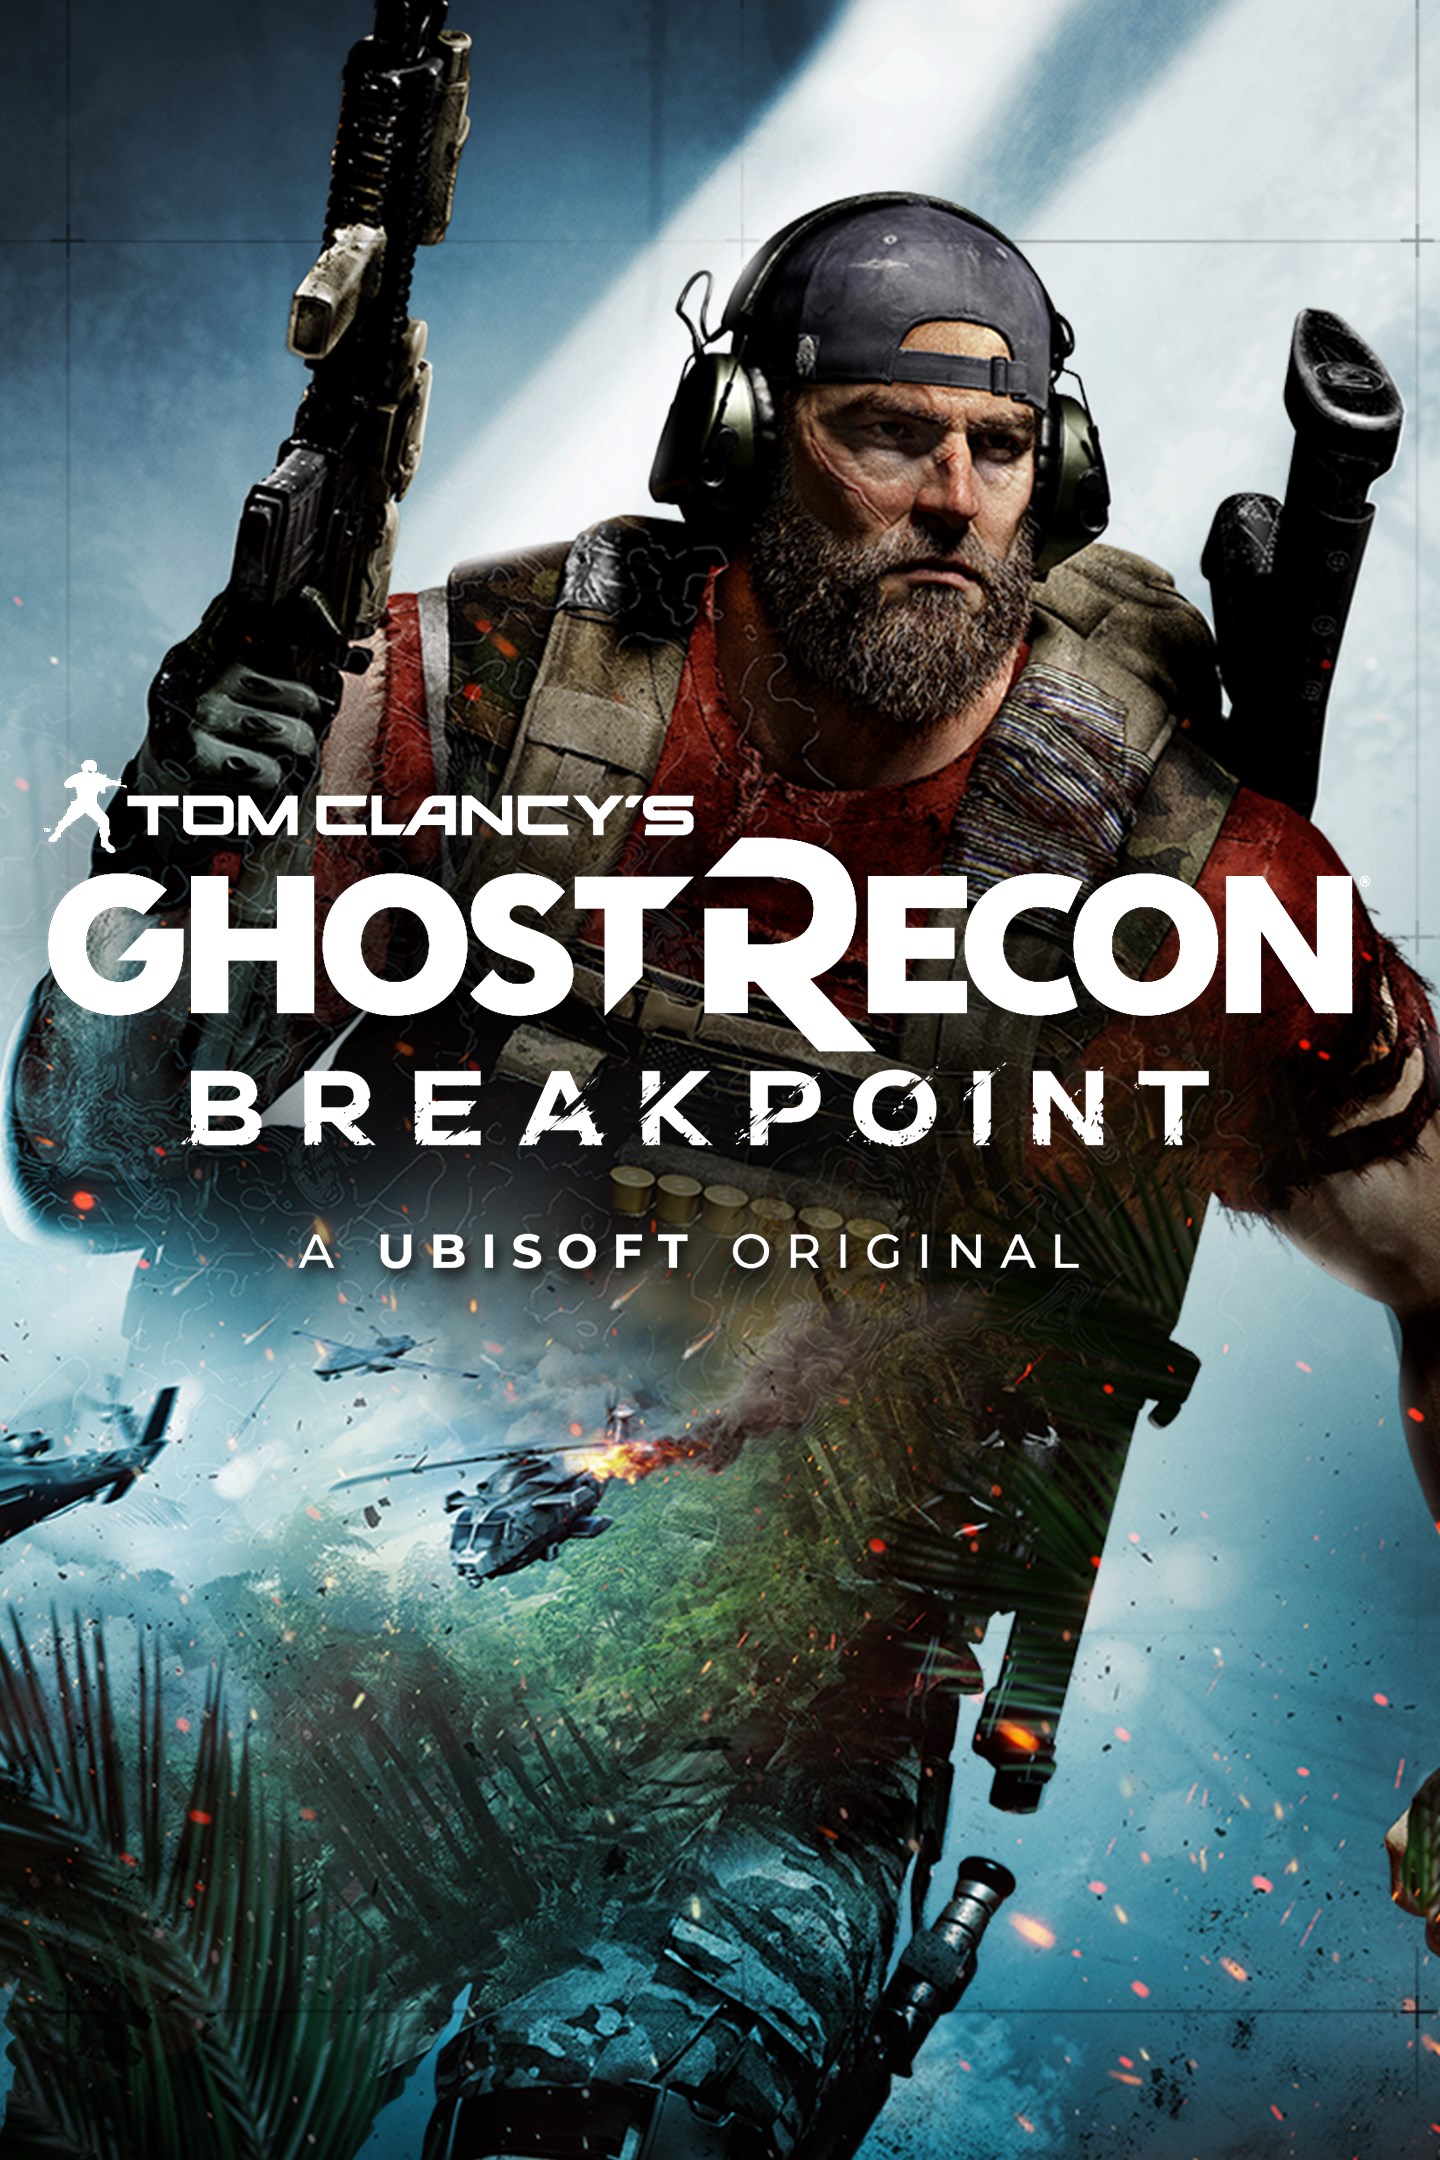 Tom Clancy's Ghost Recon® Breakpoint 包裝圖